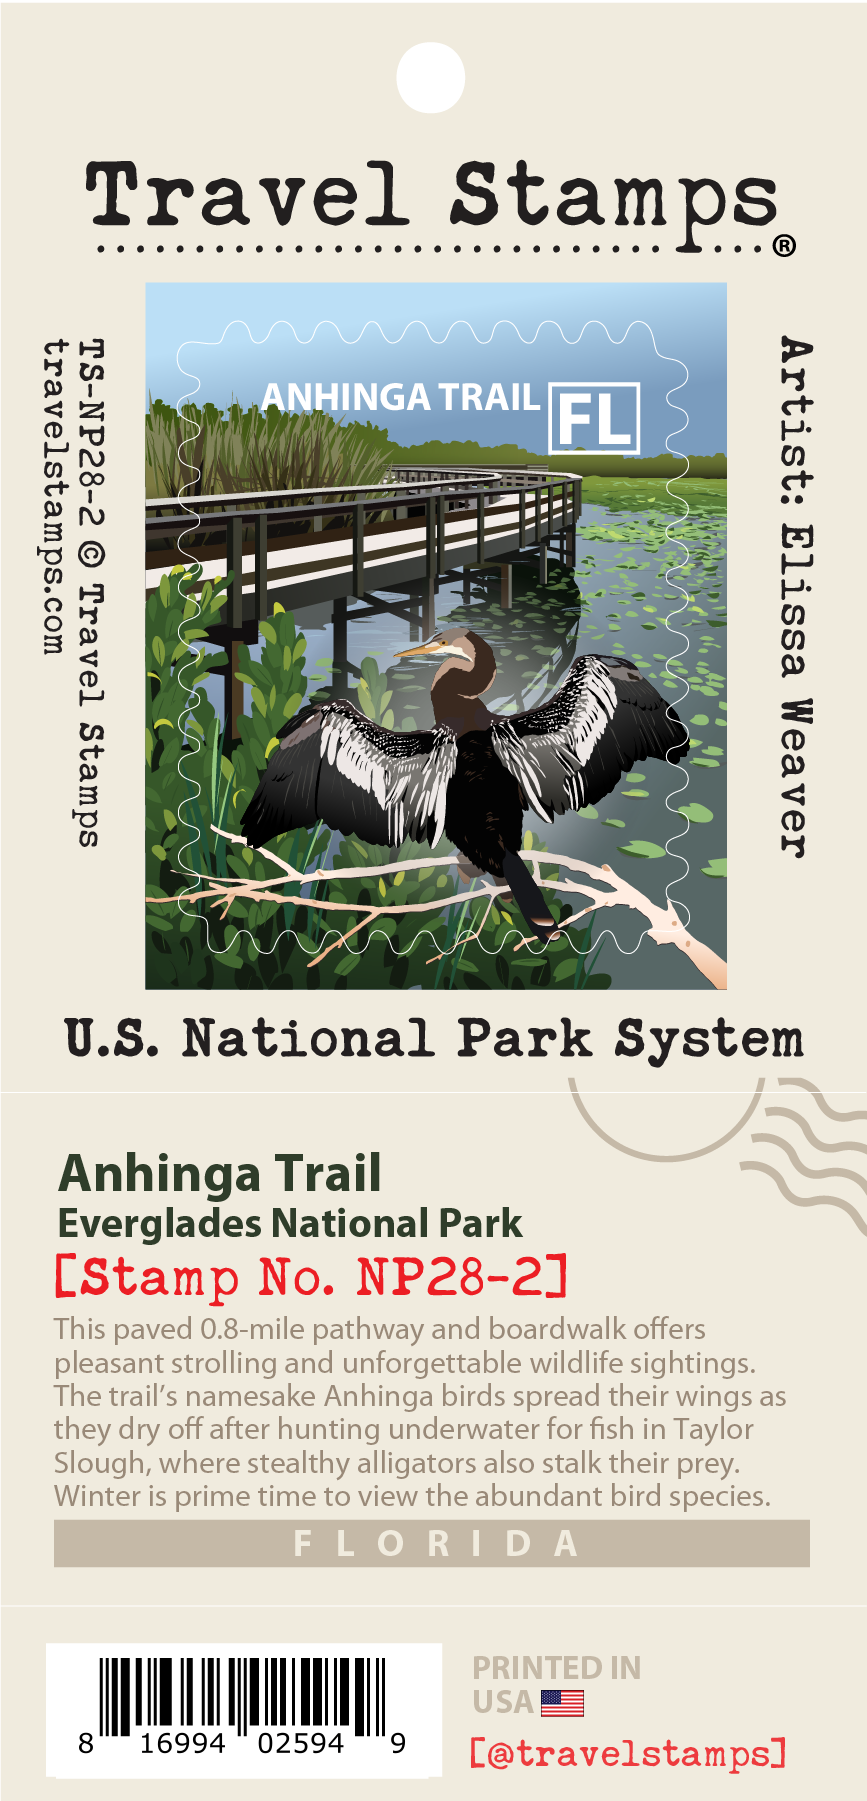 Everglades National Park - Anhinga Trail Travel Stamp – Travel Stamps